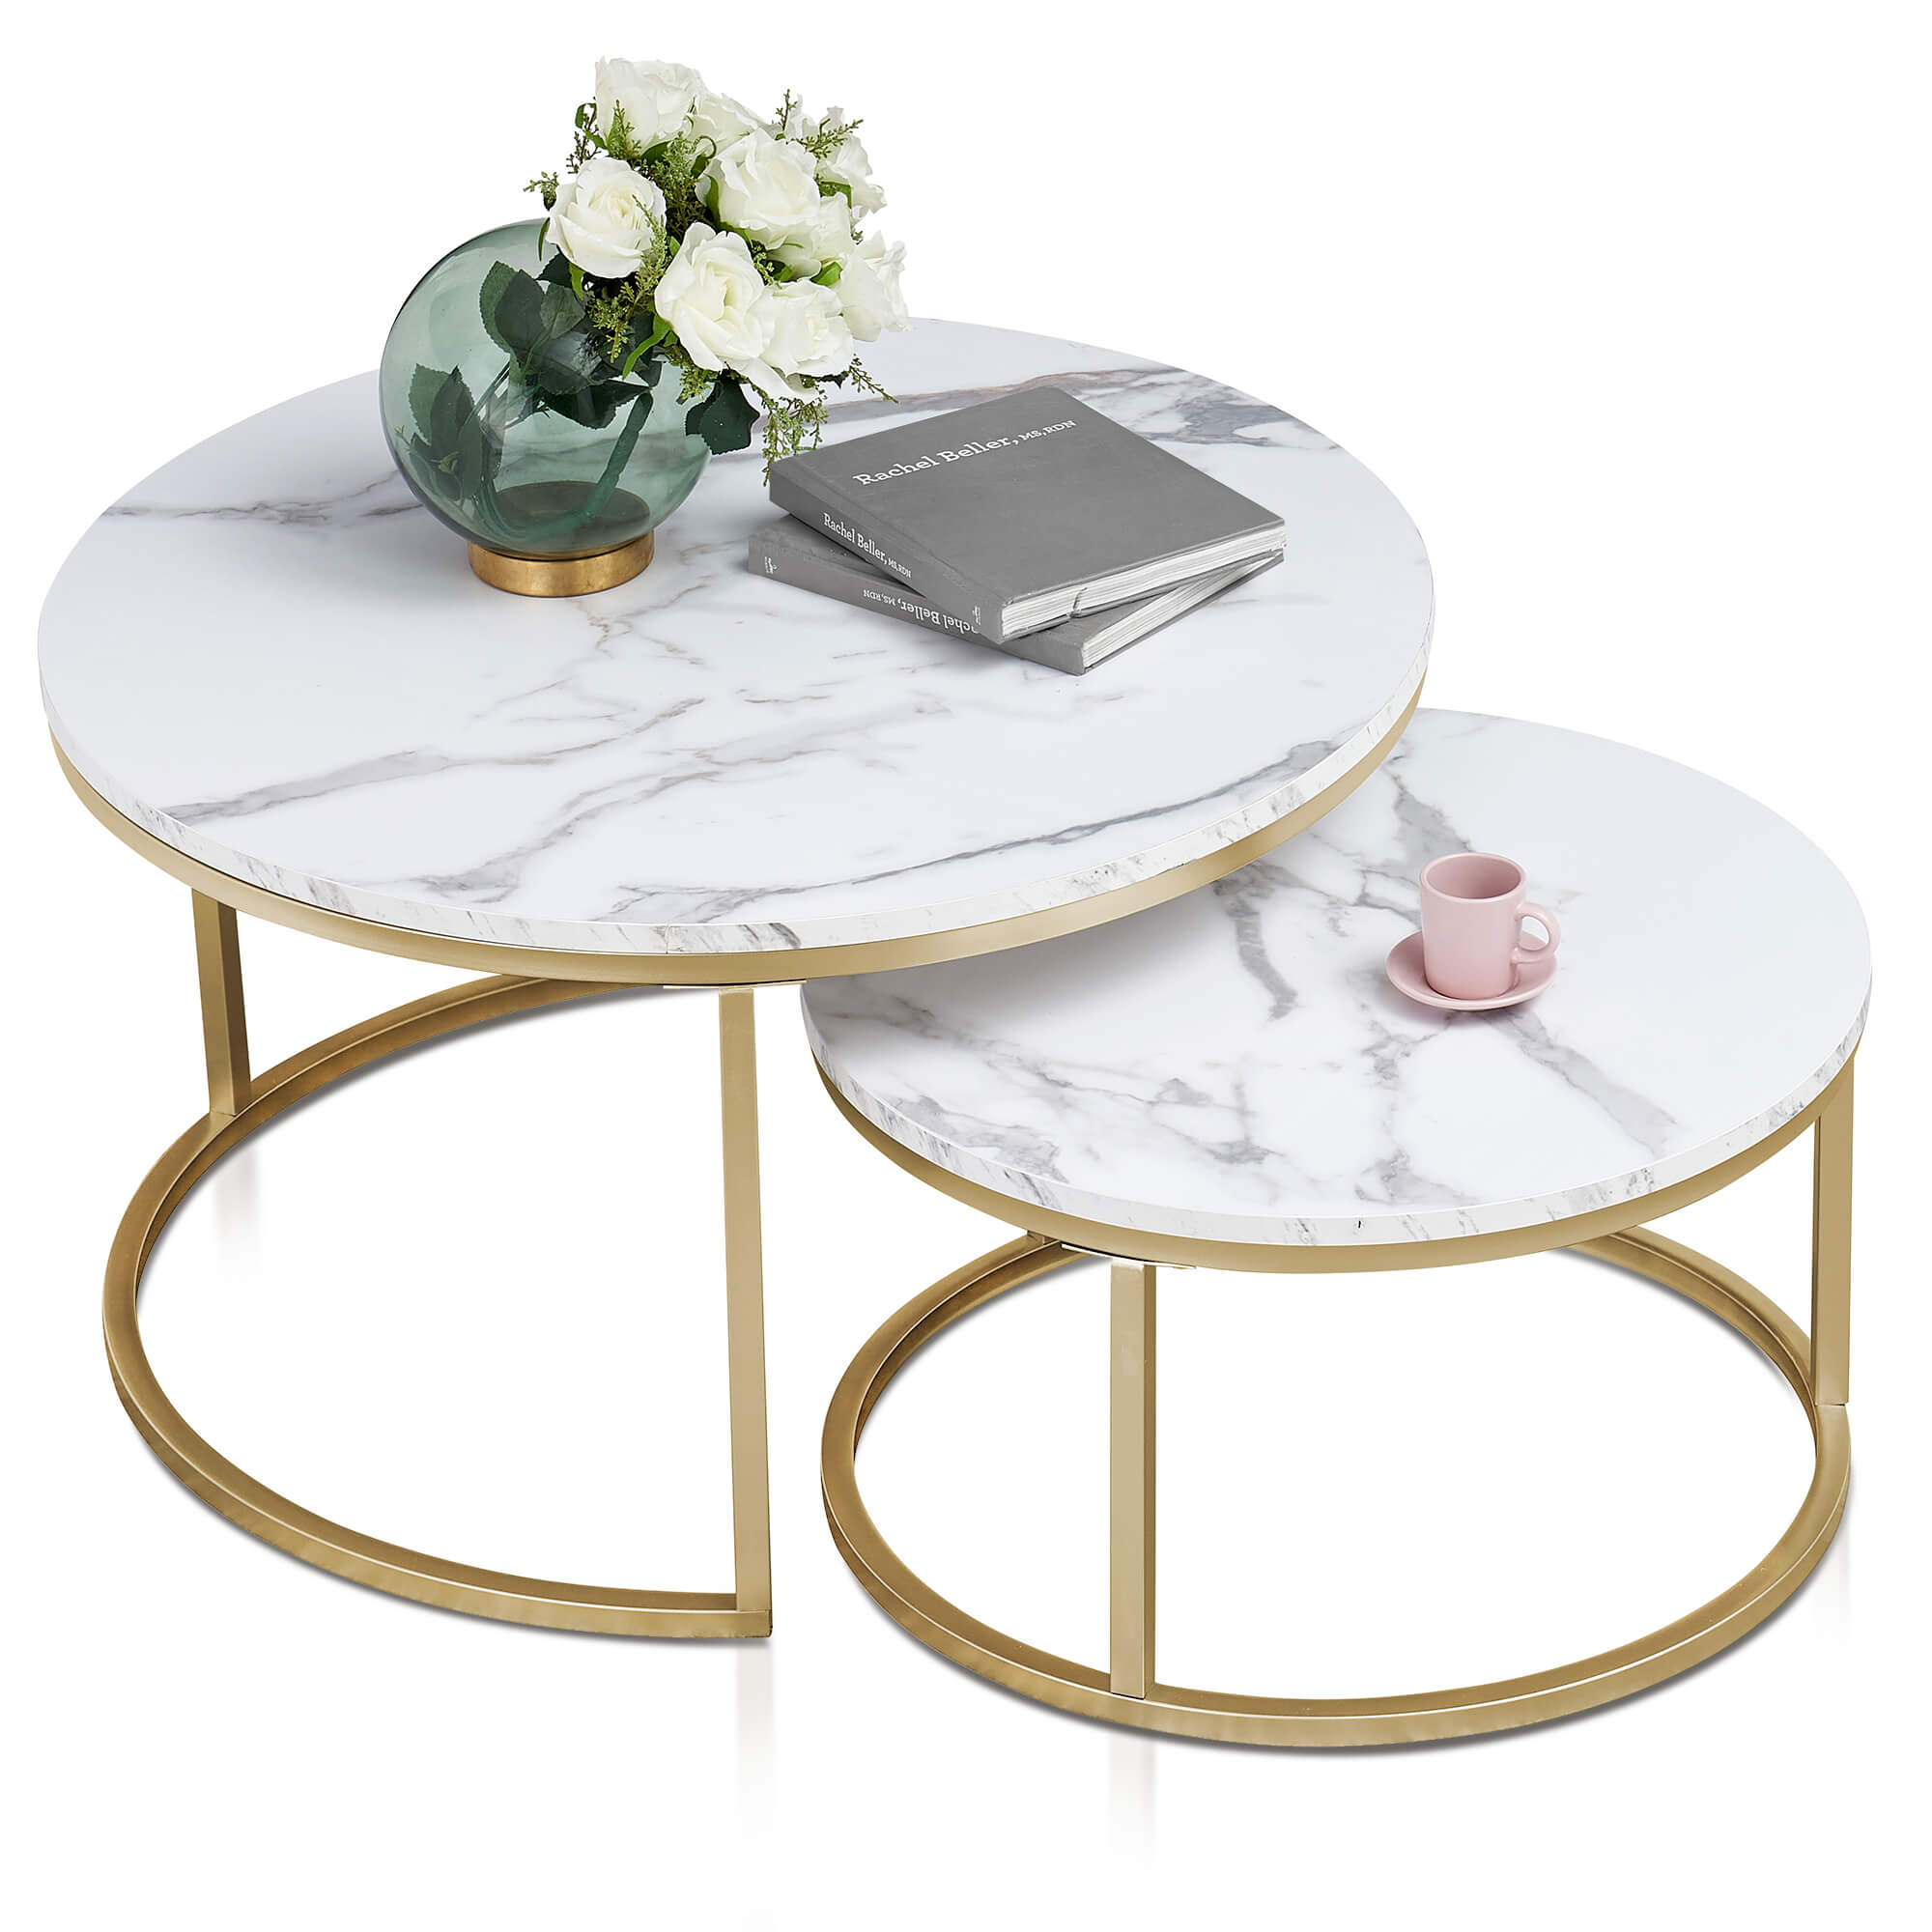 Ivinta Modern Round Nesting Coffee Table Sets, Tea Table for Living Room